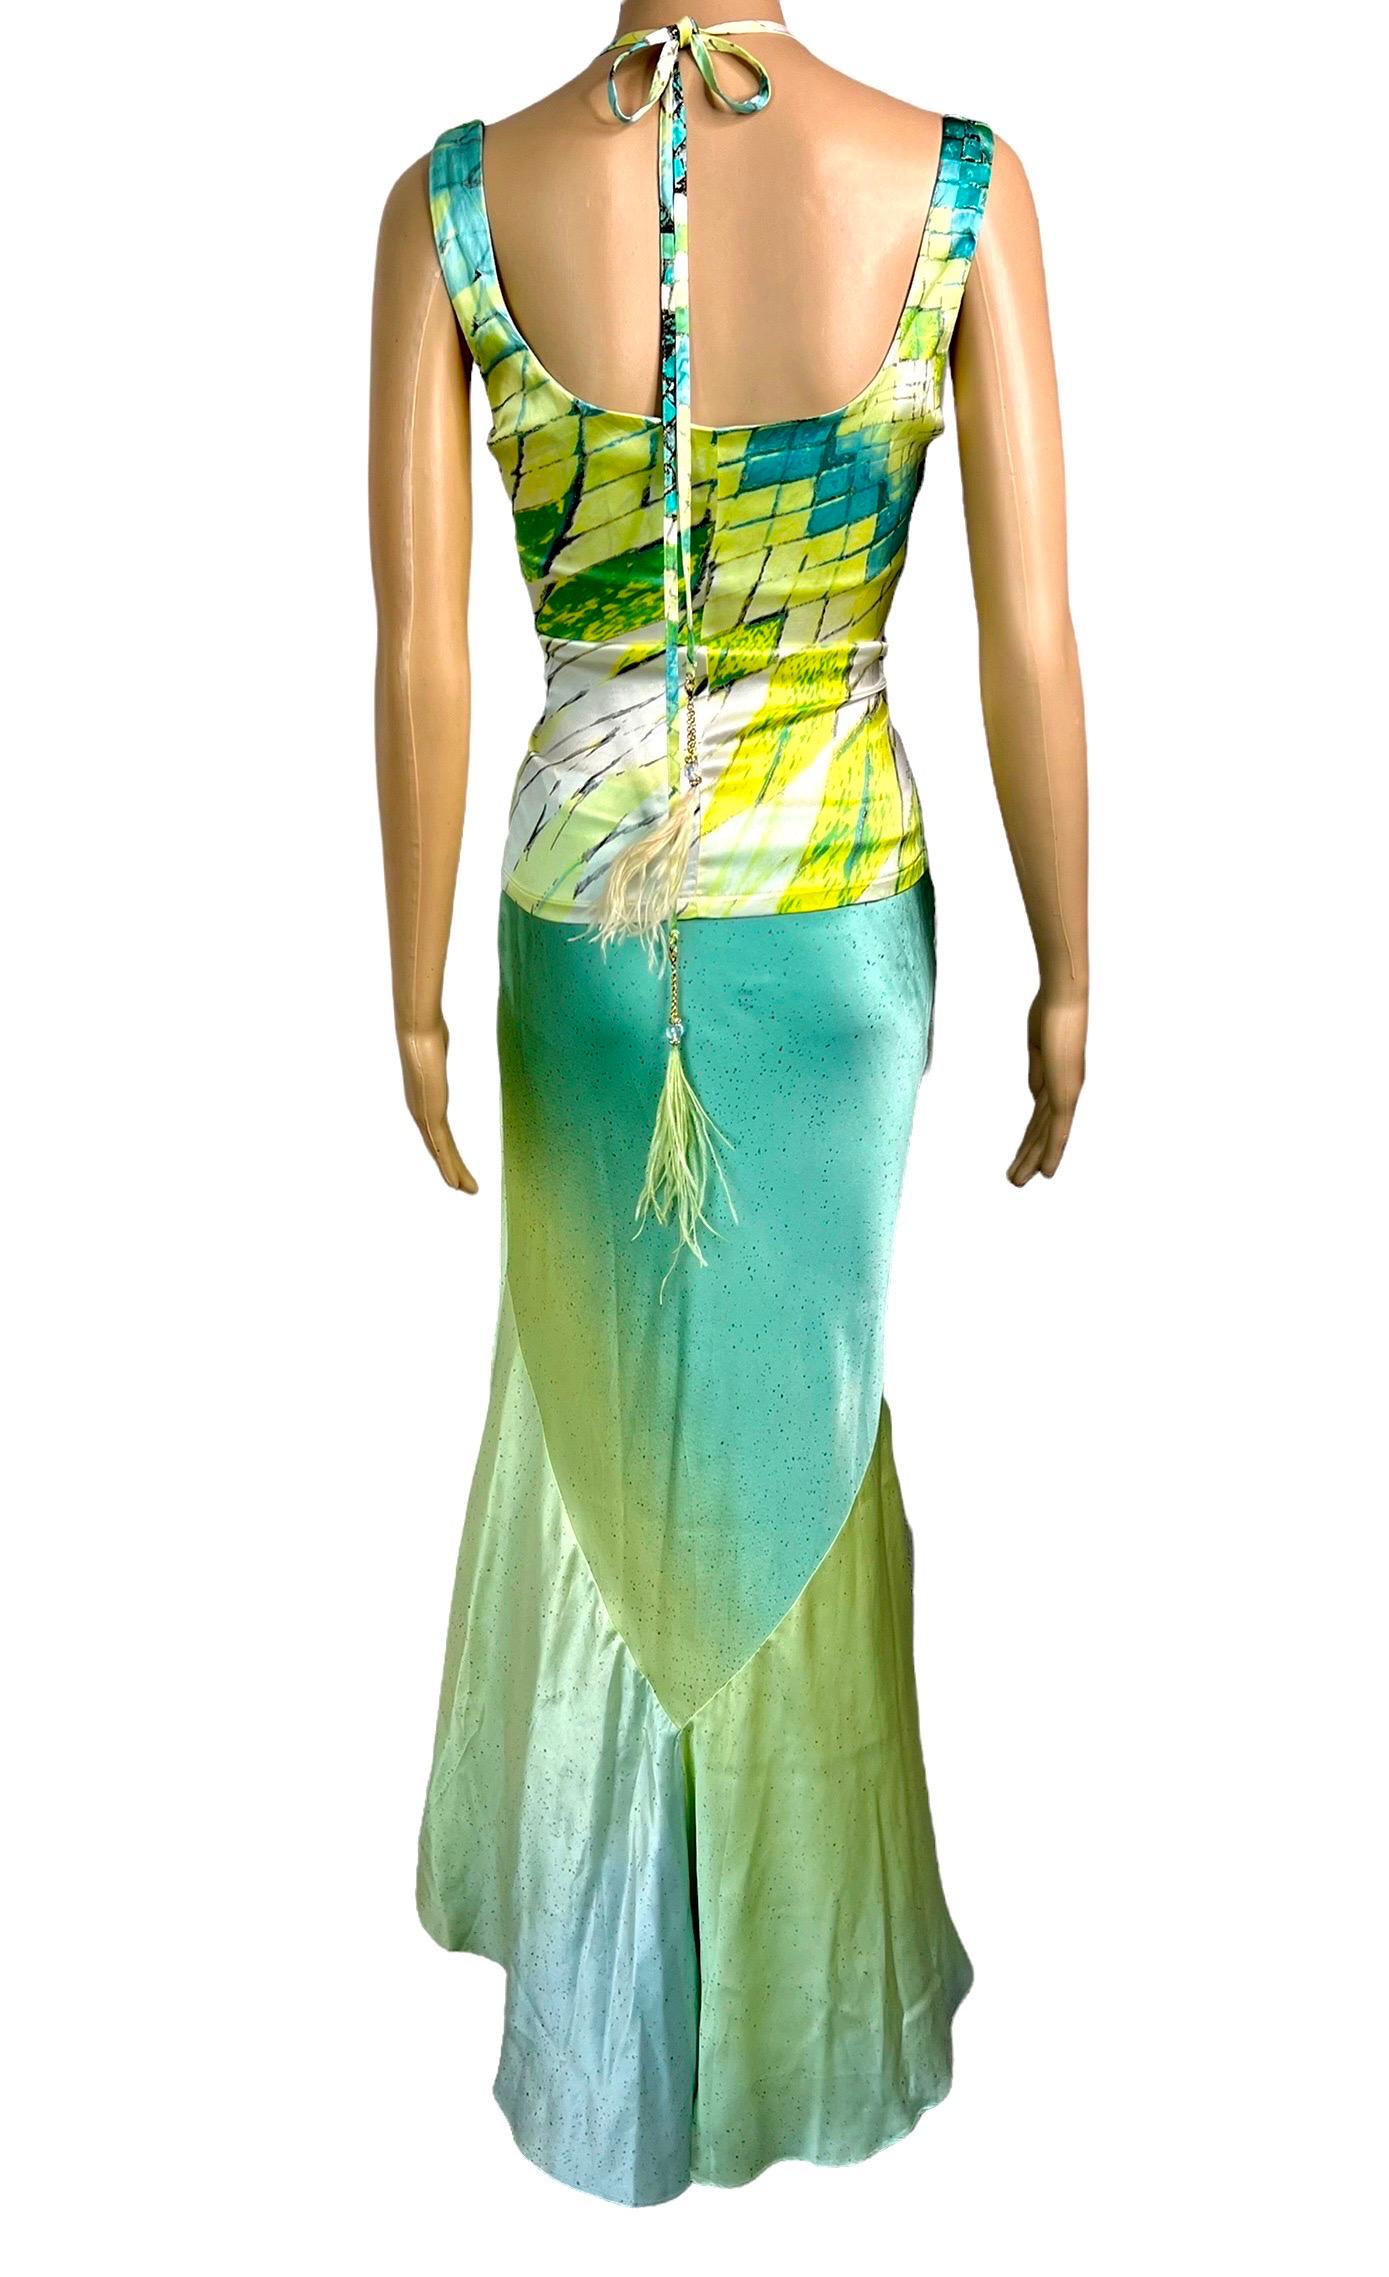 Roberto Cavalli S/S 2004 Feather Embellished Halter Top & Maxi Skirt 2 Piece Set In Good Condition For Sale In Naples, FL